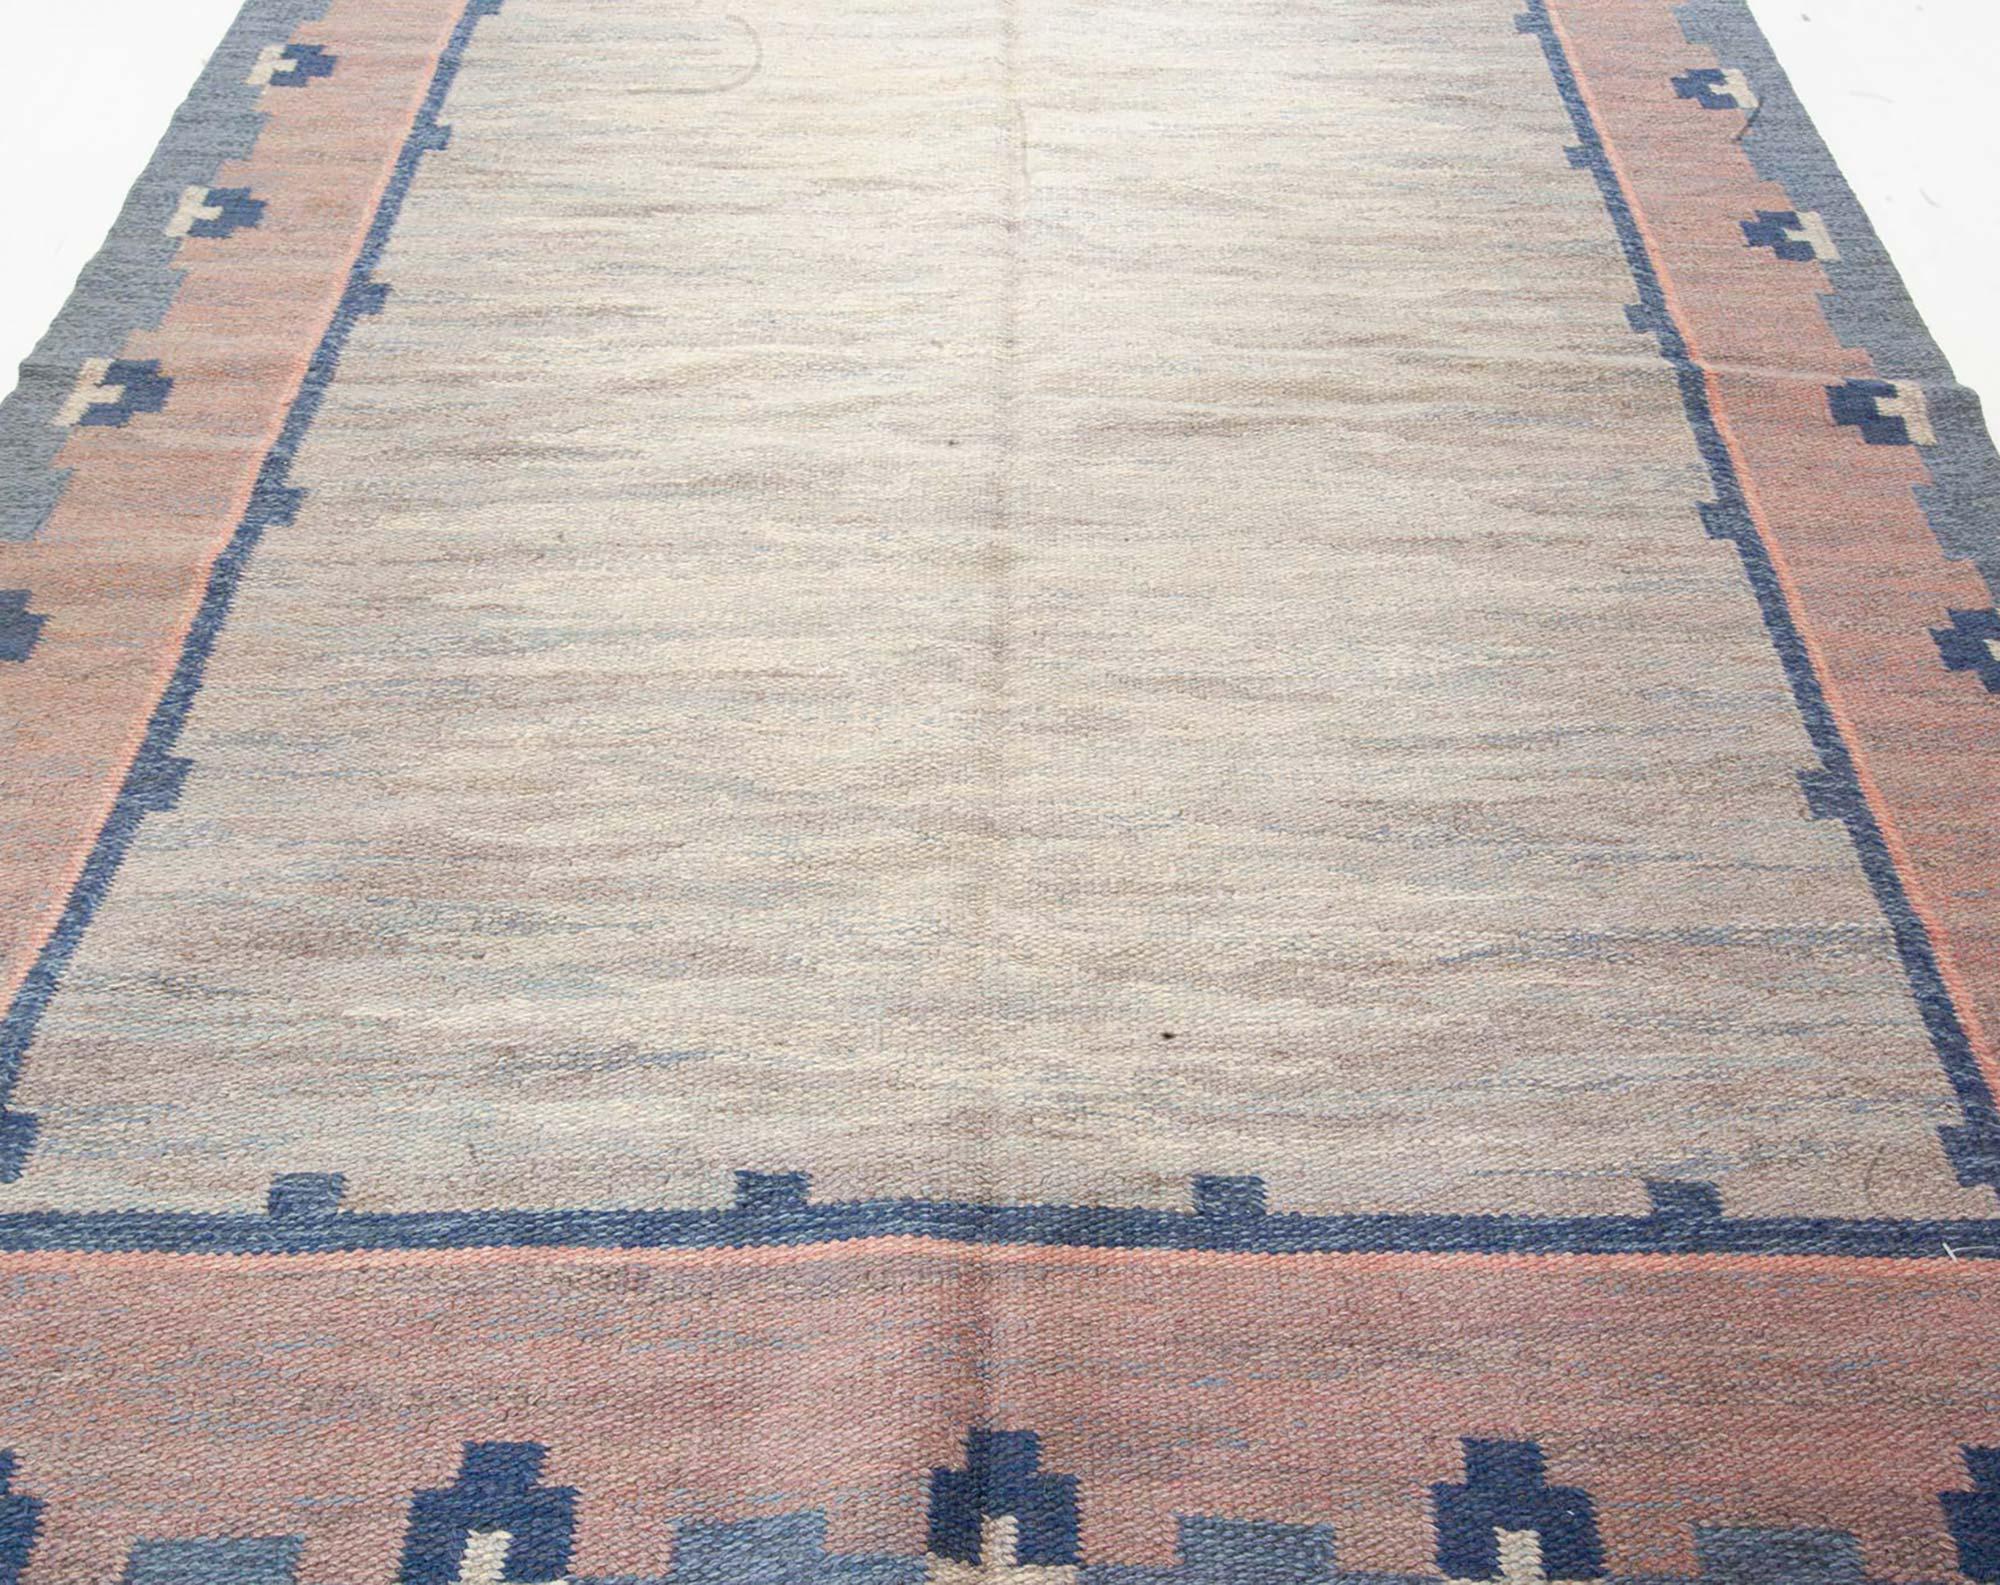 Midcentury Swedish Handmade Wool Rug by 'ABJ' In Good Condition For Sale In New York, NY